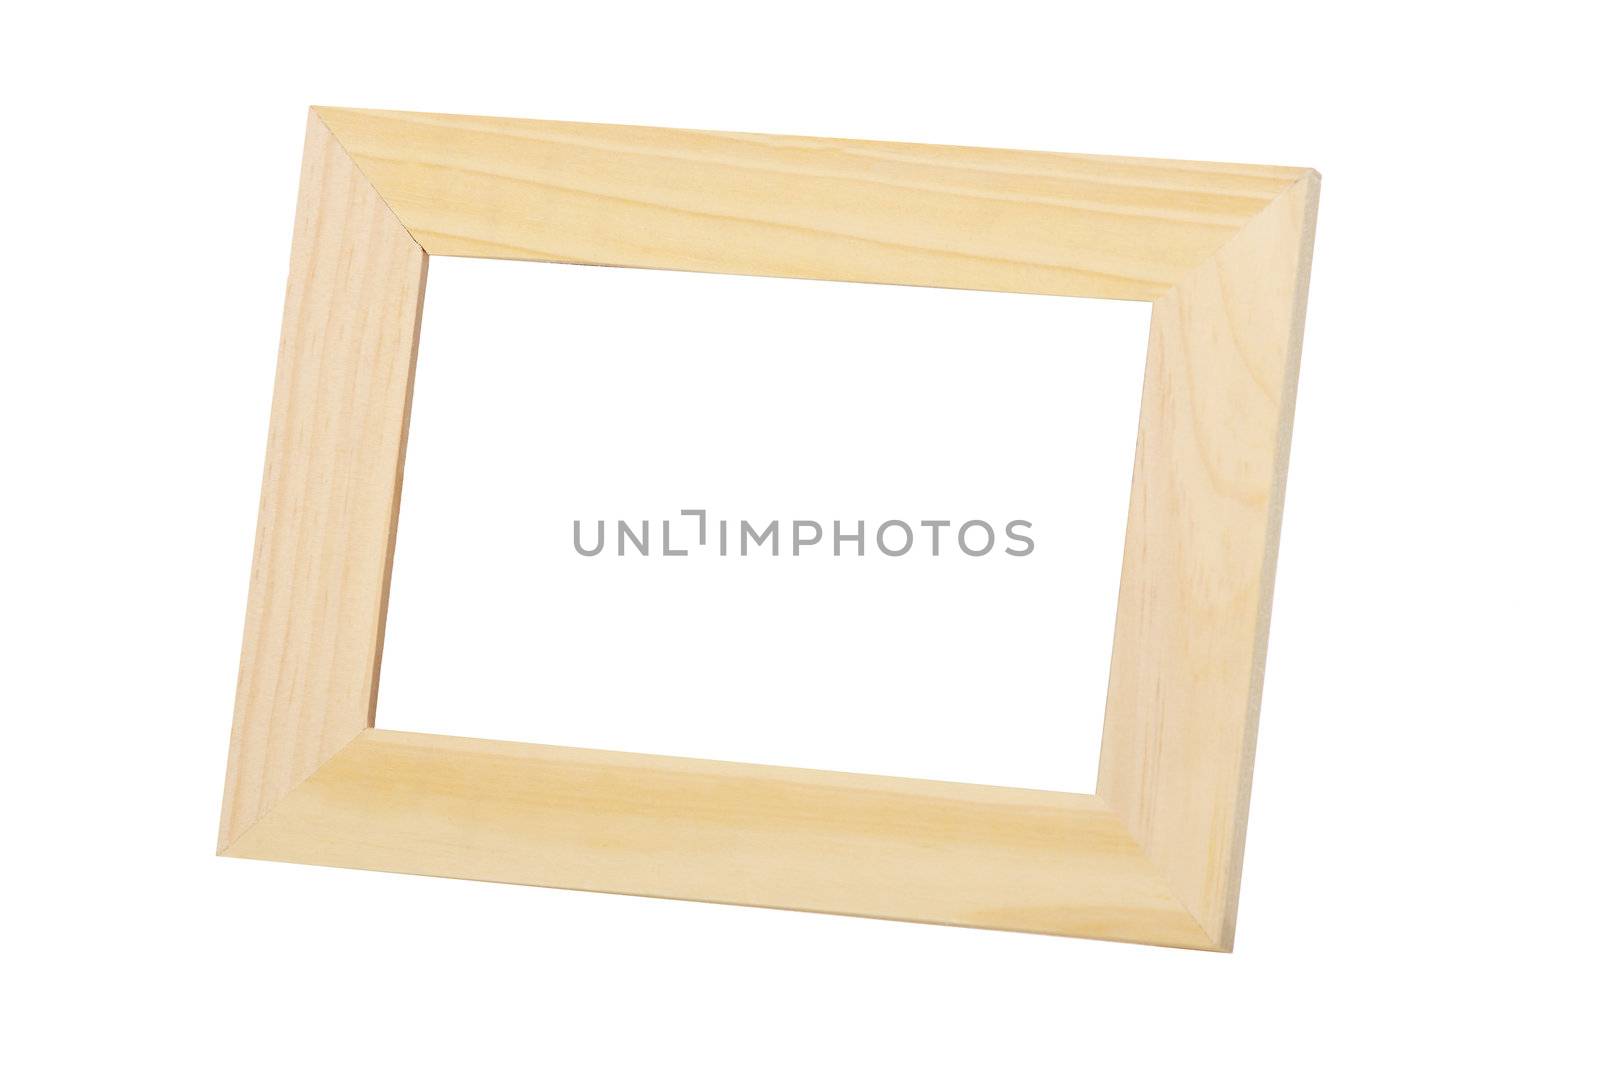 Wooden frame for painting or picture on white background